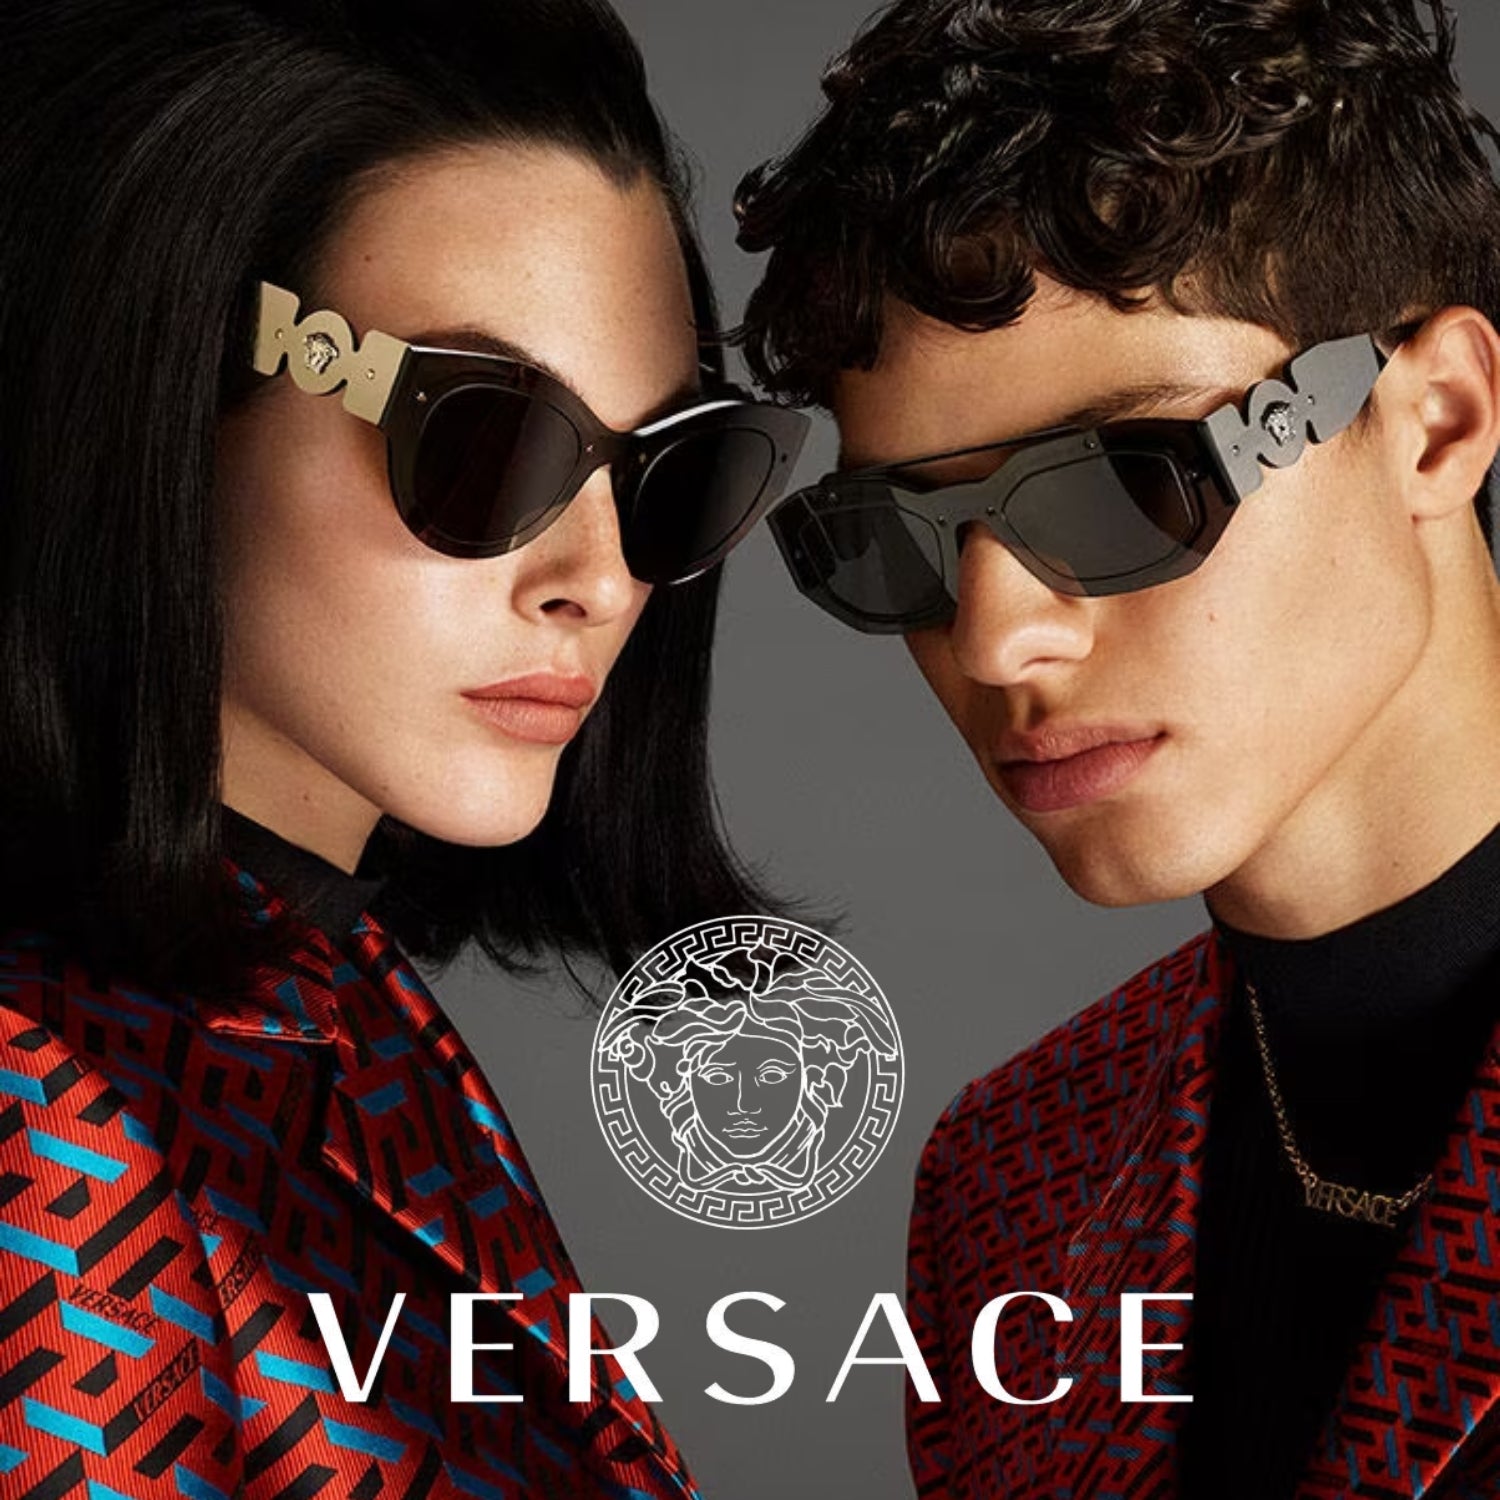 "Versace sunglasses for men and women - stylish eyewear by Optorium, offering fashionable opticals for both genders."